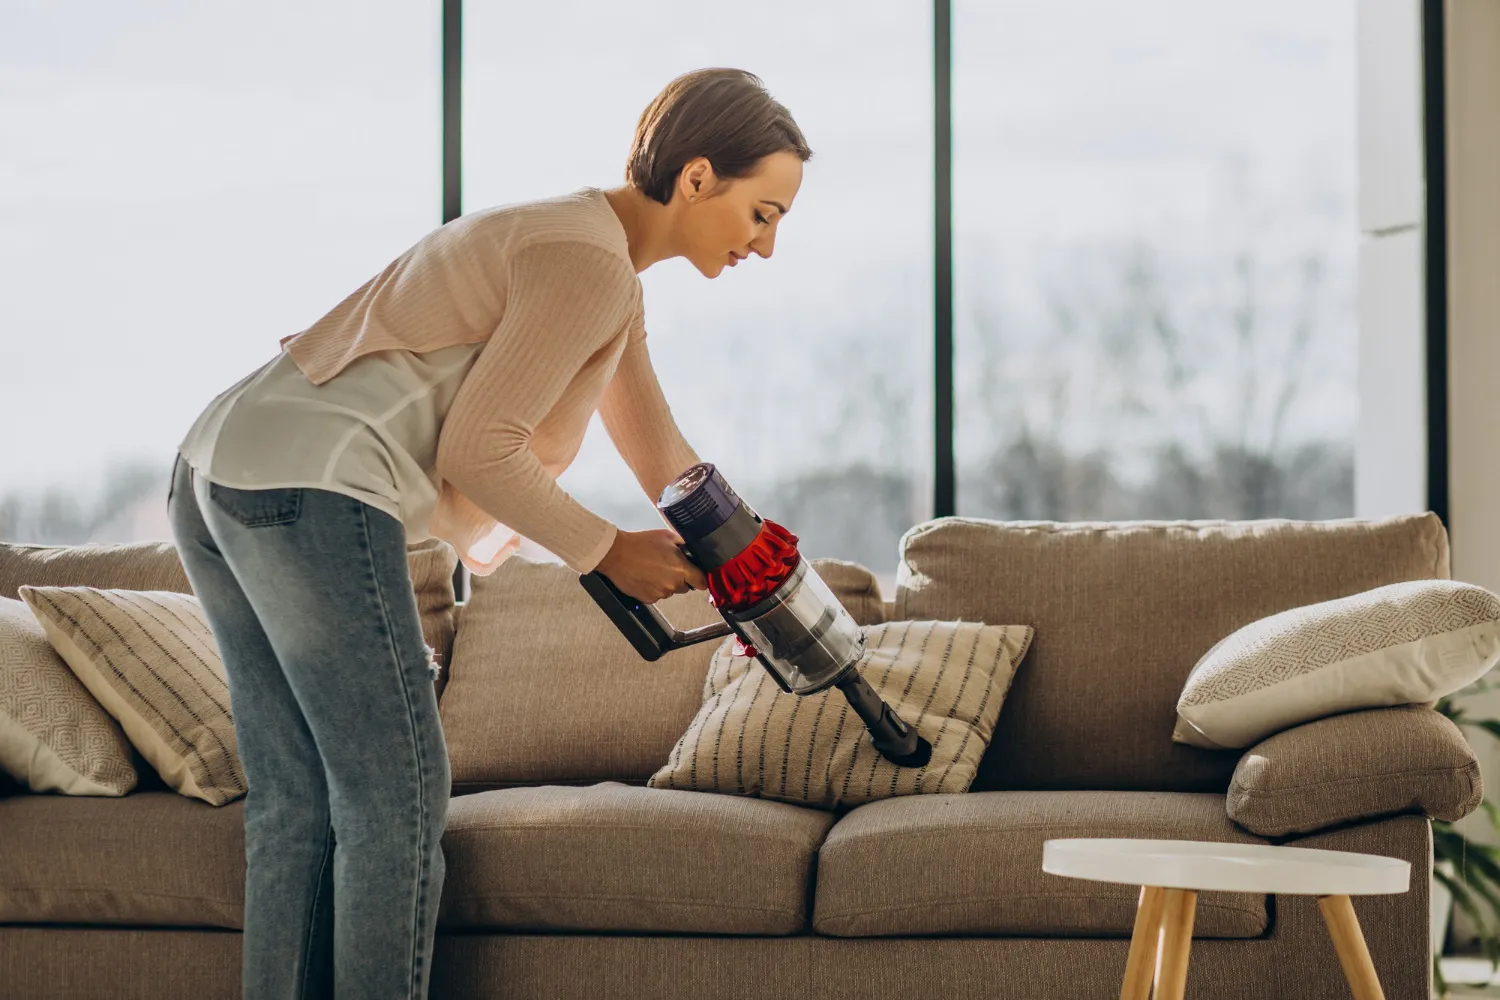 professional sofa cleaning services